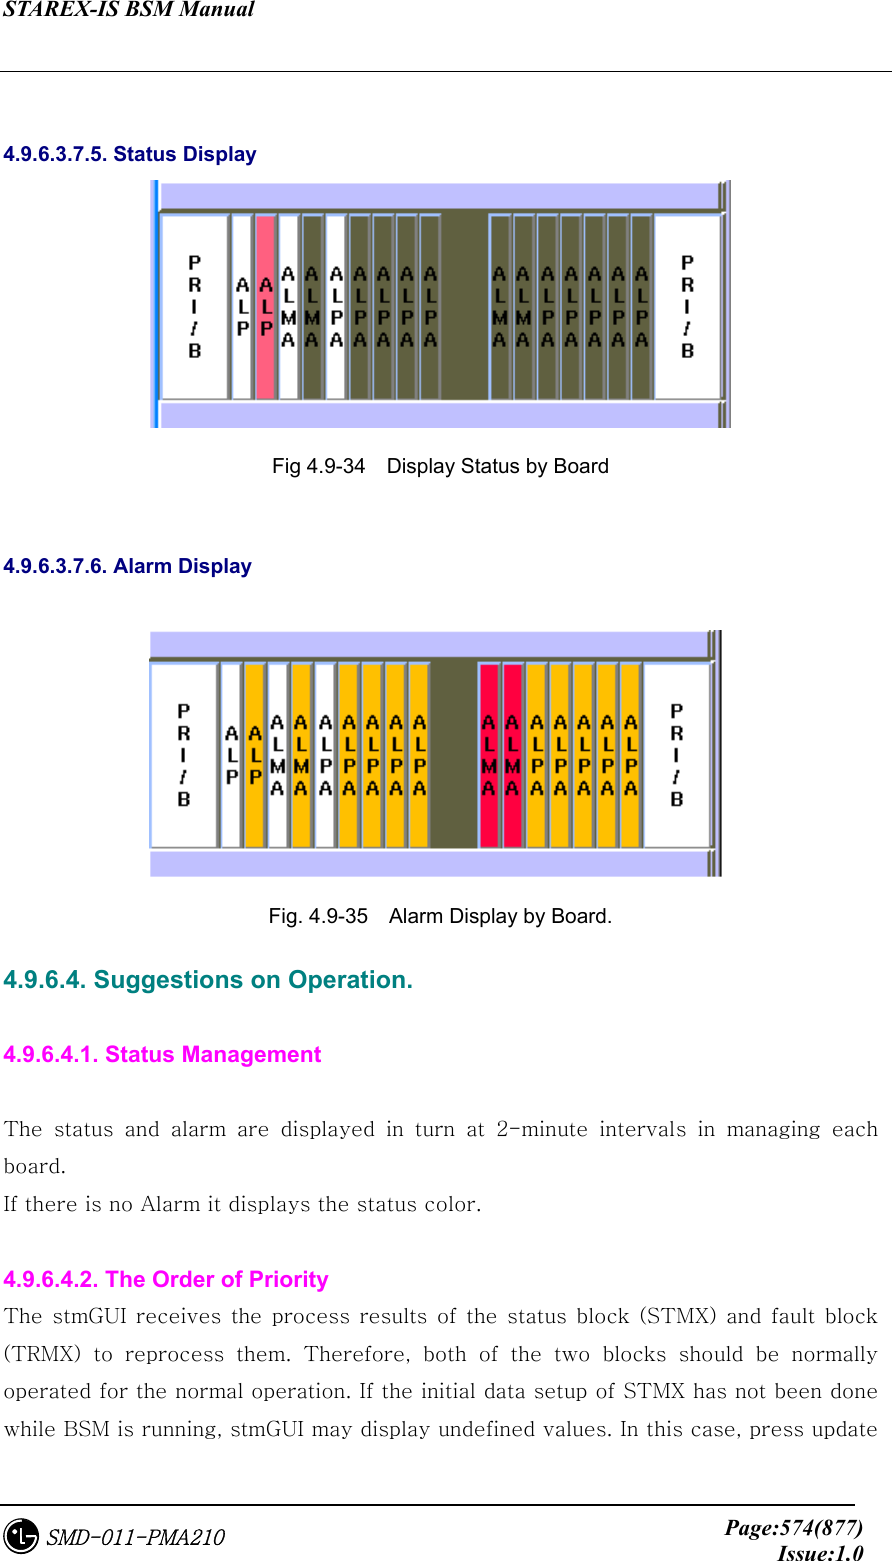 STAREX-IS BSM Manual     Page:574(877)Issue:1.0SMD-011-PMA210  4.9.6.3.7.5. Status Display  Fig 4.9-34    Display Status by Board  4.9.6.3.7.6. Alarm Display   Fig. 4.9-35    Alarm Display by Board. 4.9.6.4. Suggestions on Operation.  4.9.6.4.1. Status Management  The status and alarm are displayed in turn at 2-minute intervals  in  managing  each board. If there is no Alarm it displays the status color.  4.9.6.4.2. The Order of Priority The  stmGUI receives  the process results of  the status block (STMX)  and  fault  block (TRMX)  to  reprocess  them.  Therefore,  both  of  the  two  blocks  should  be  normally operated for the normal operation. If the initial data setup of STMX has not been done while BSM is running, stmGUI may display undefined values. In this case, press update 